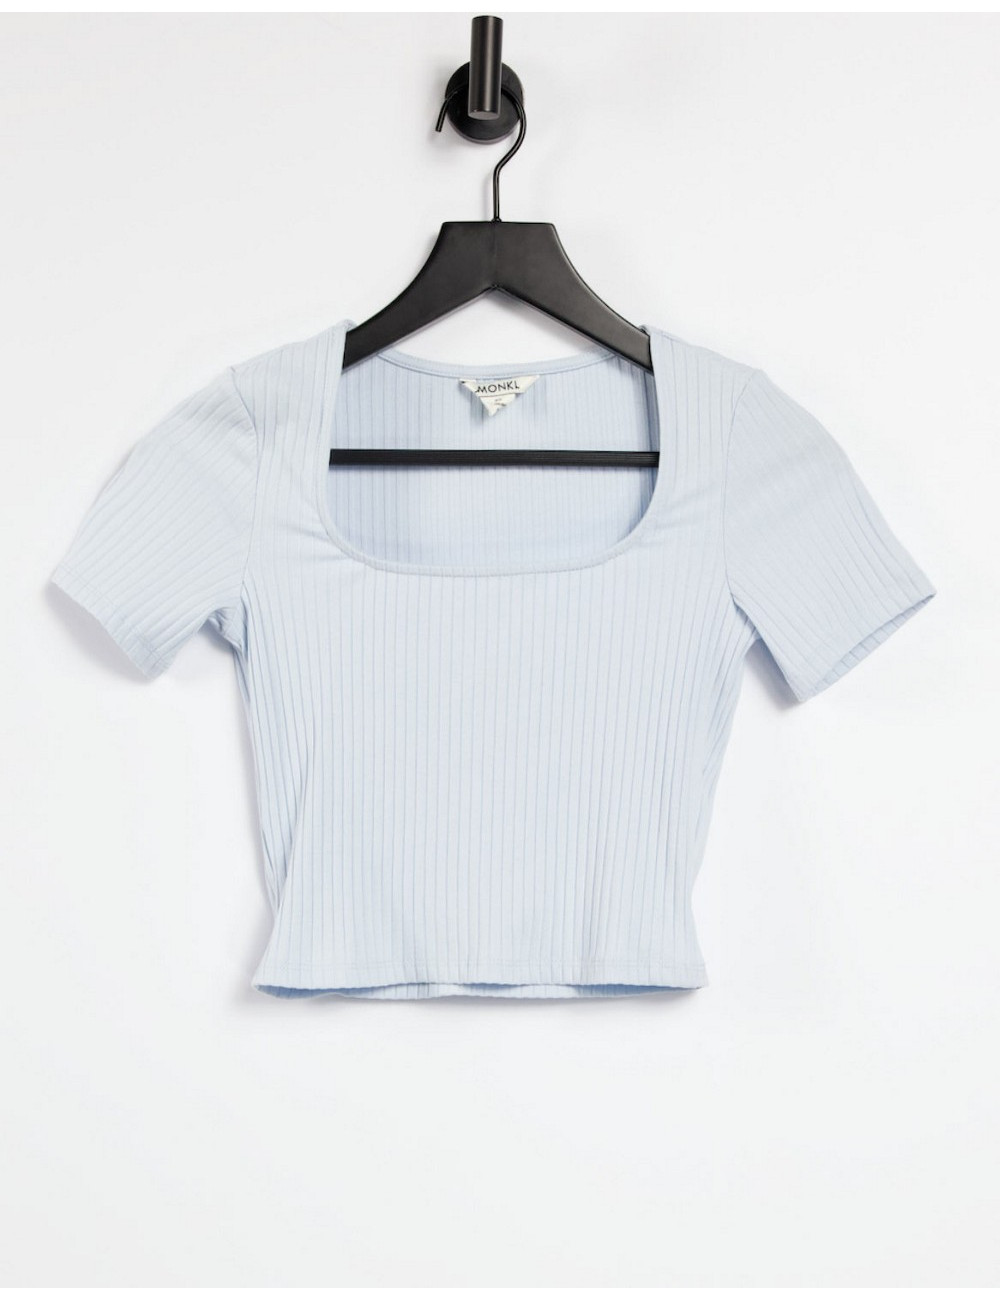 Monki Cora top with square...